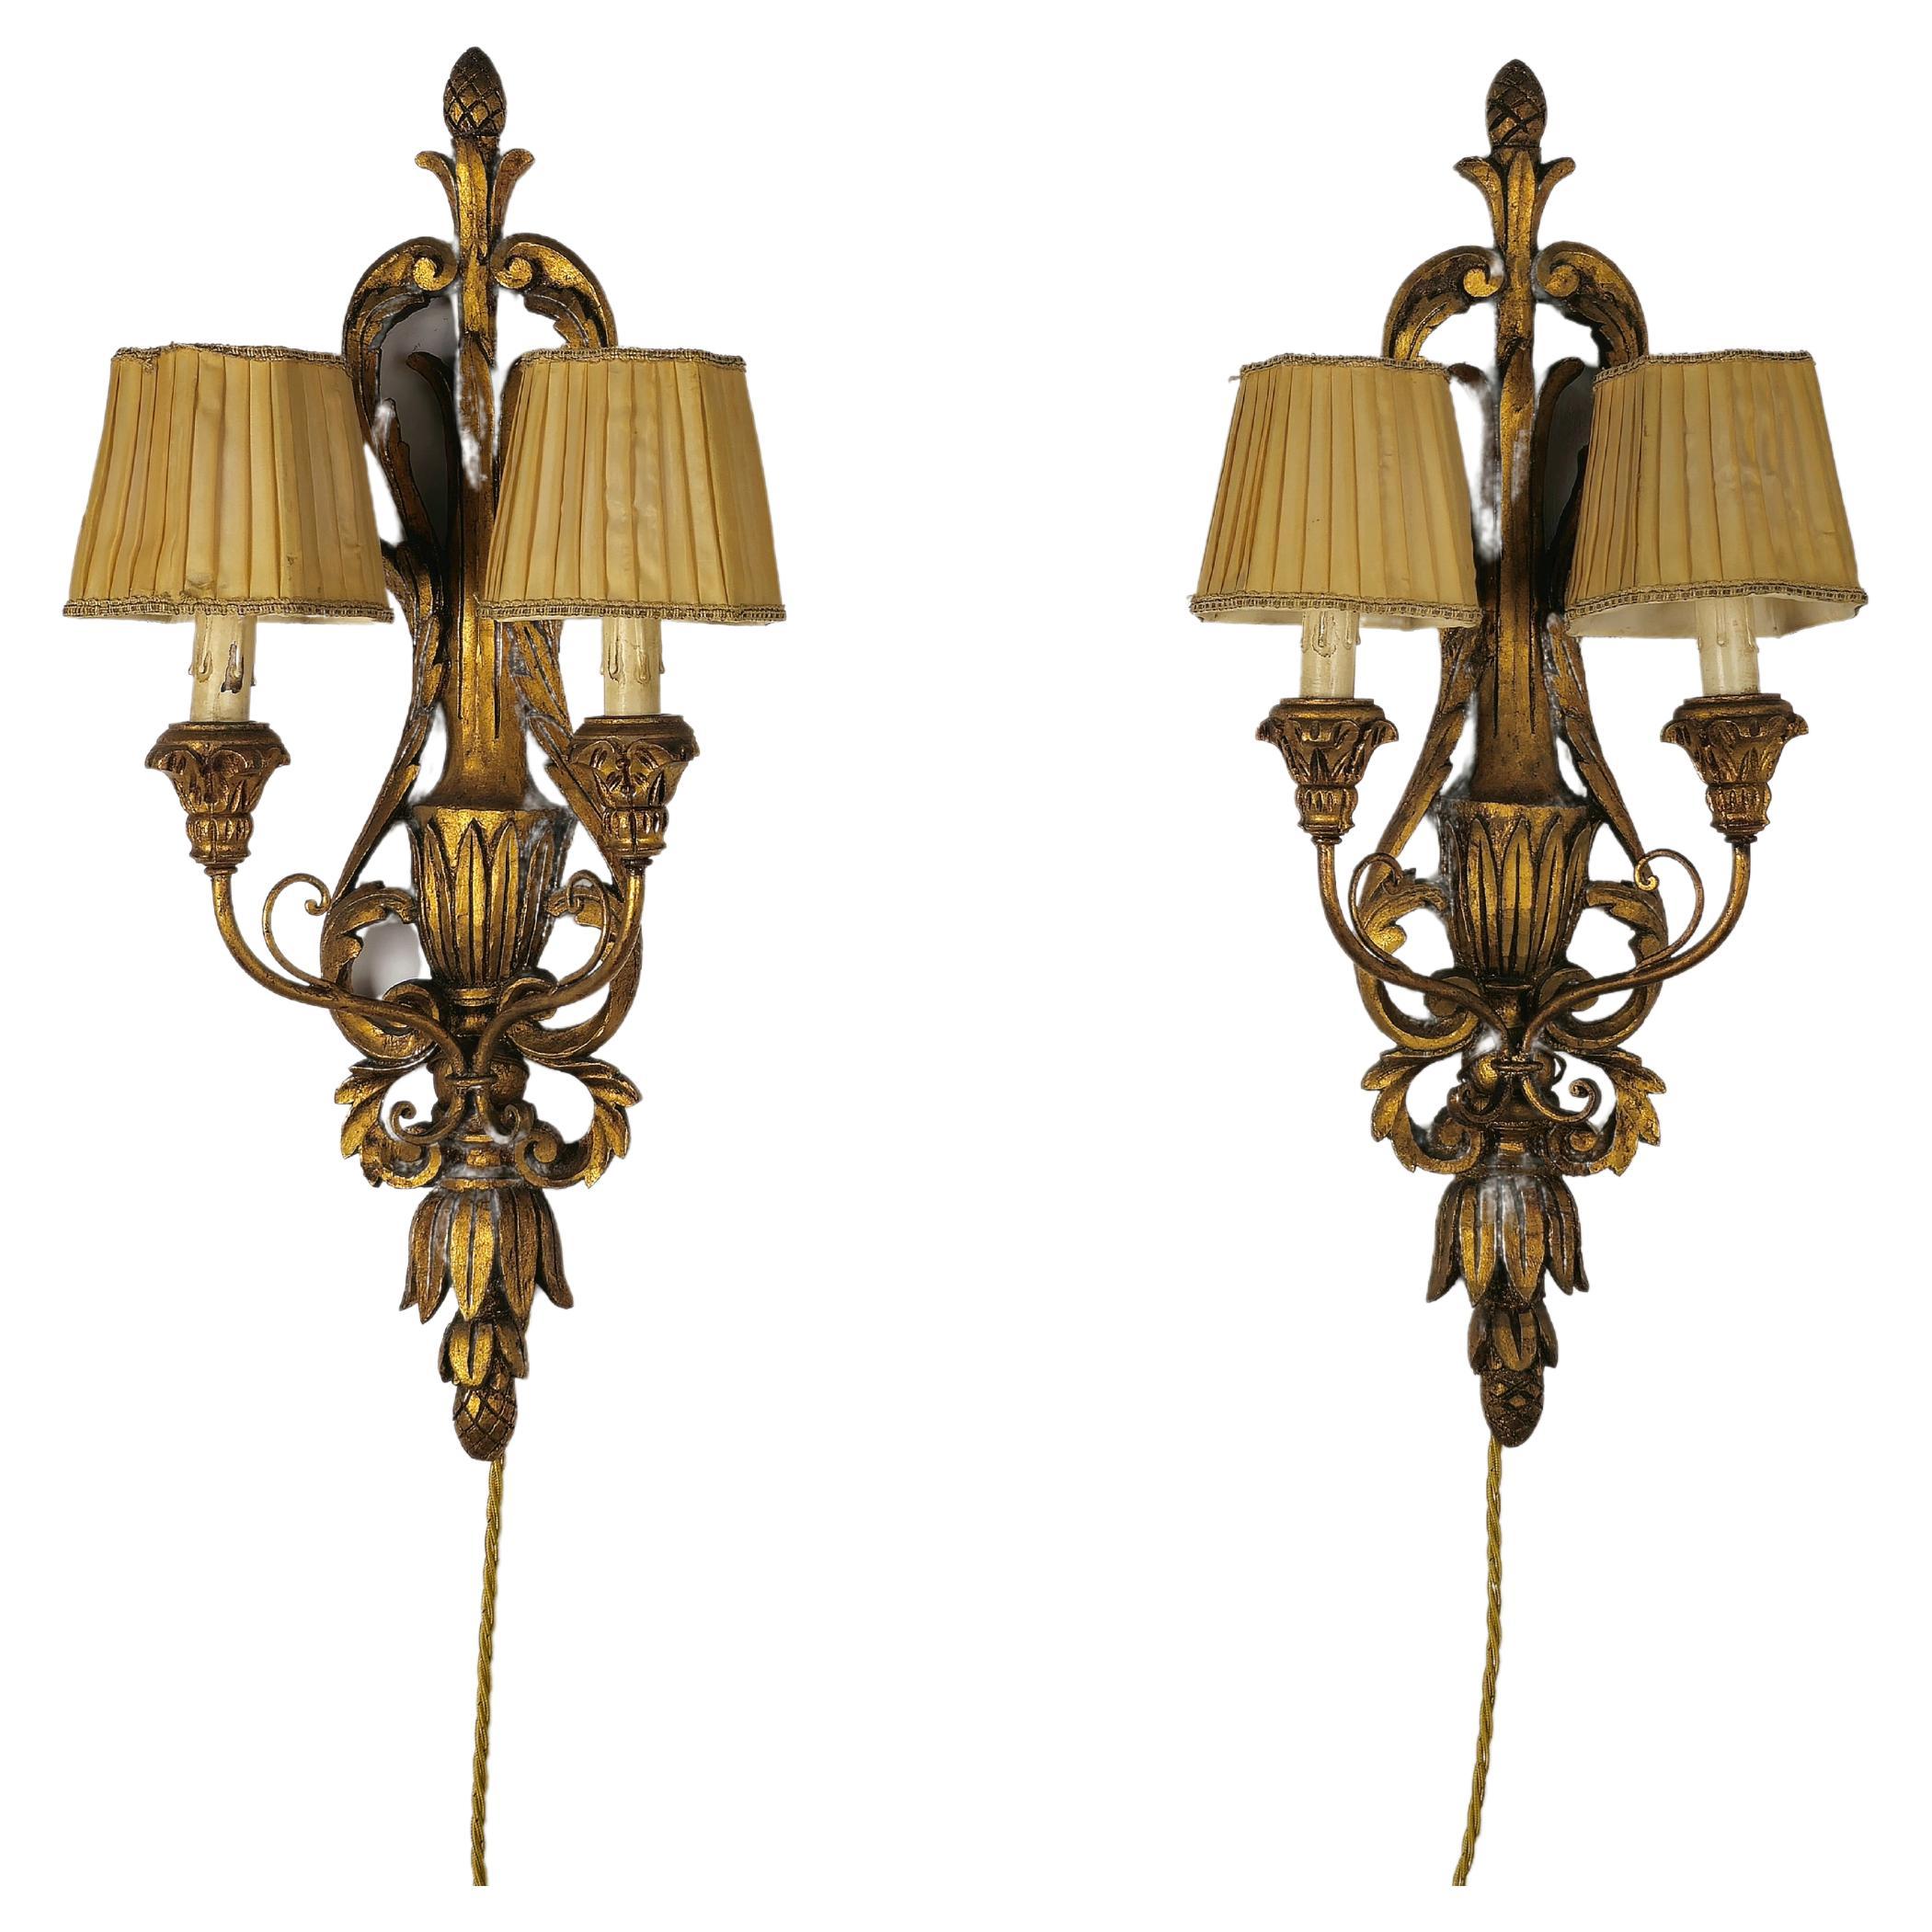 Pair of Wall Lights Sconces Wood Carved Silk Midcentury Italian Design 1950s 